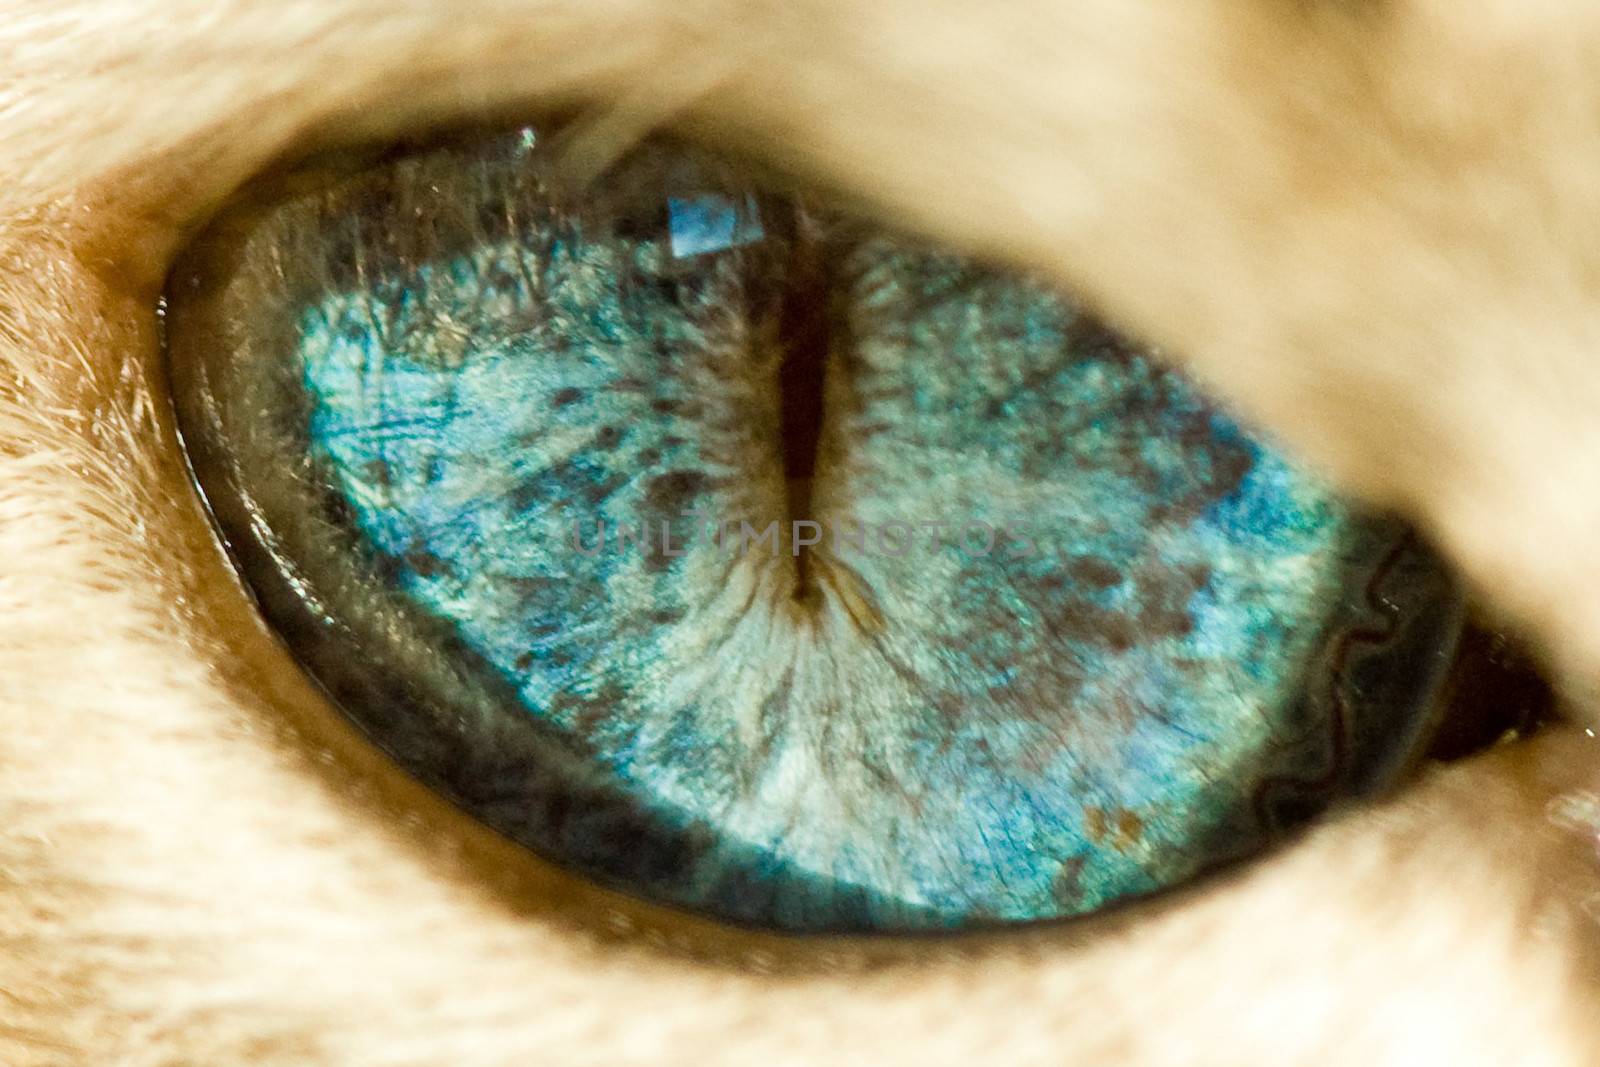 The blue eye of a cat.